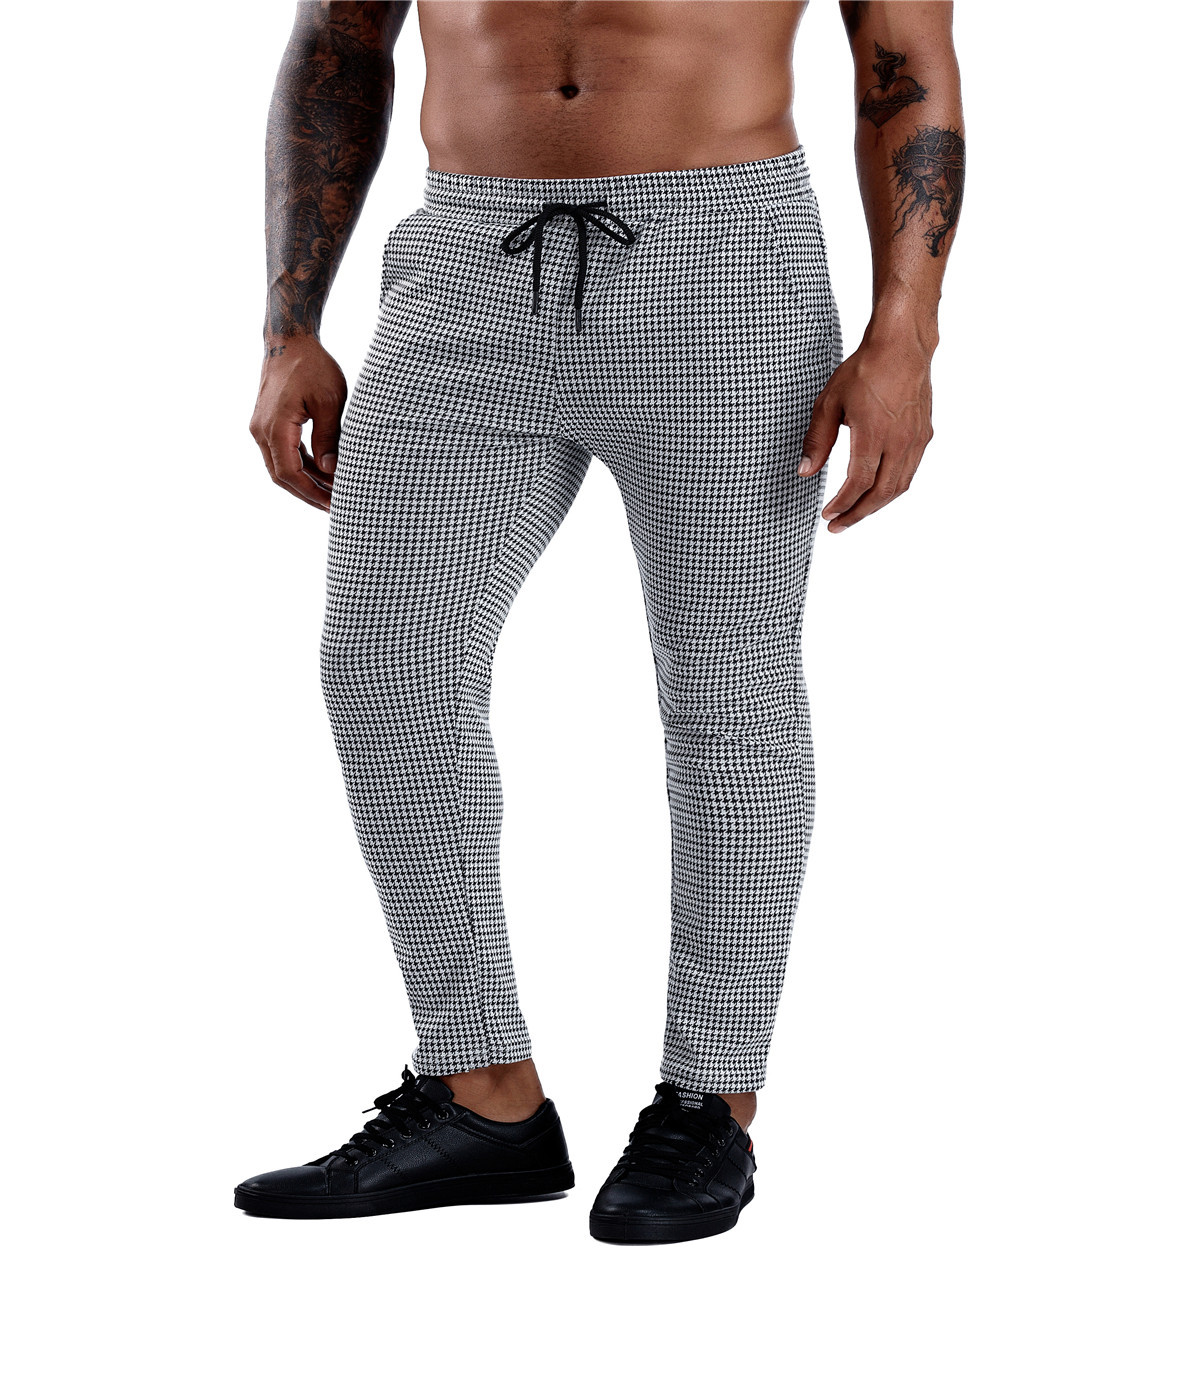 fa21f2ba 7e64 4bea afad a79acc9b023b - Tapered leg men's checkered trousers